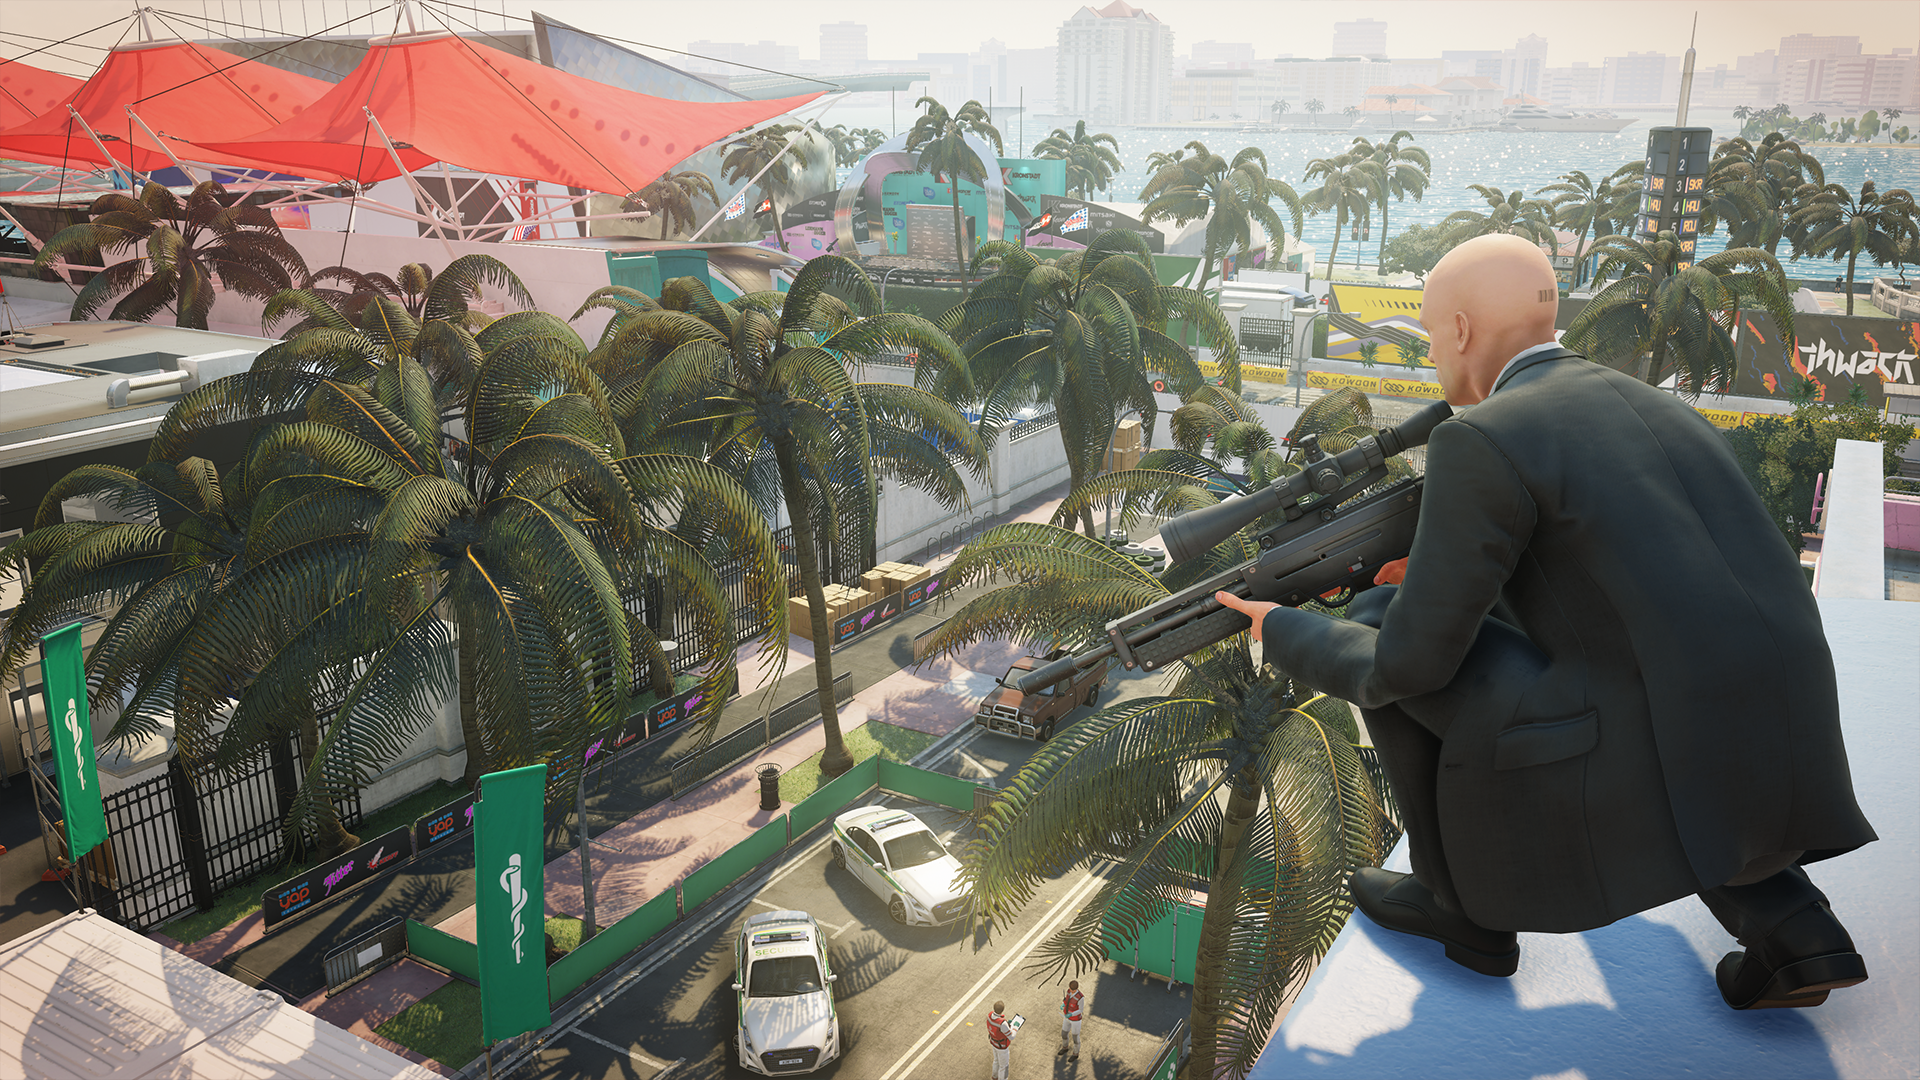 Image from Hitman 2